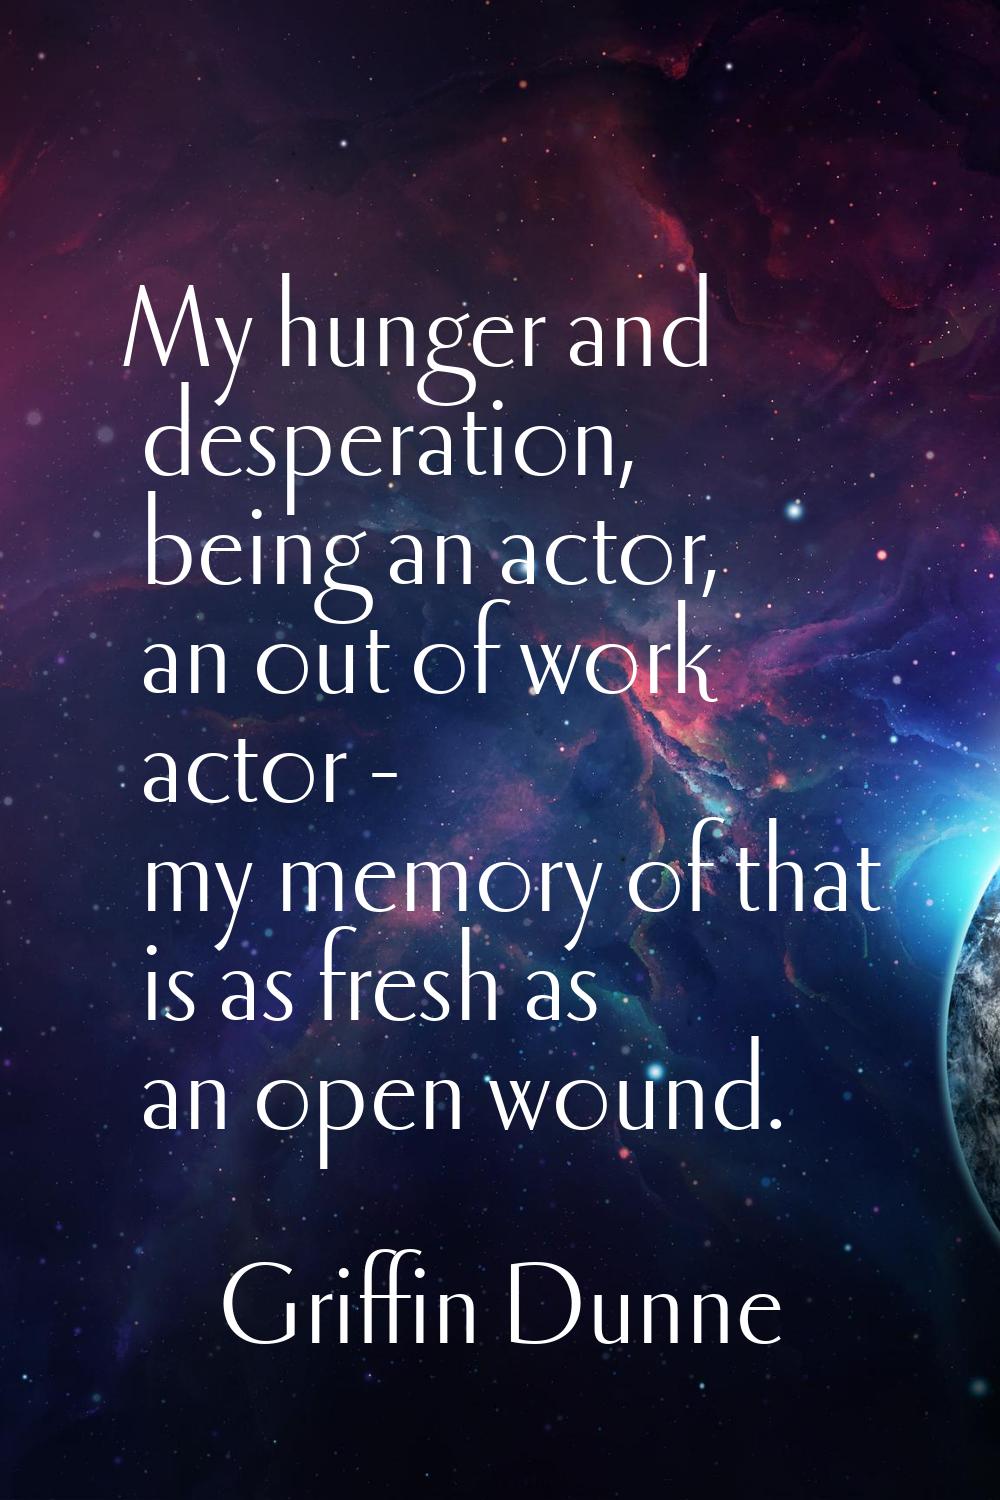 My hunger and desperation, being an actor, an out of work actor - my memory of that is as fresh as 